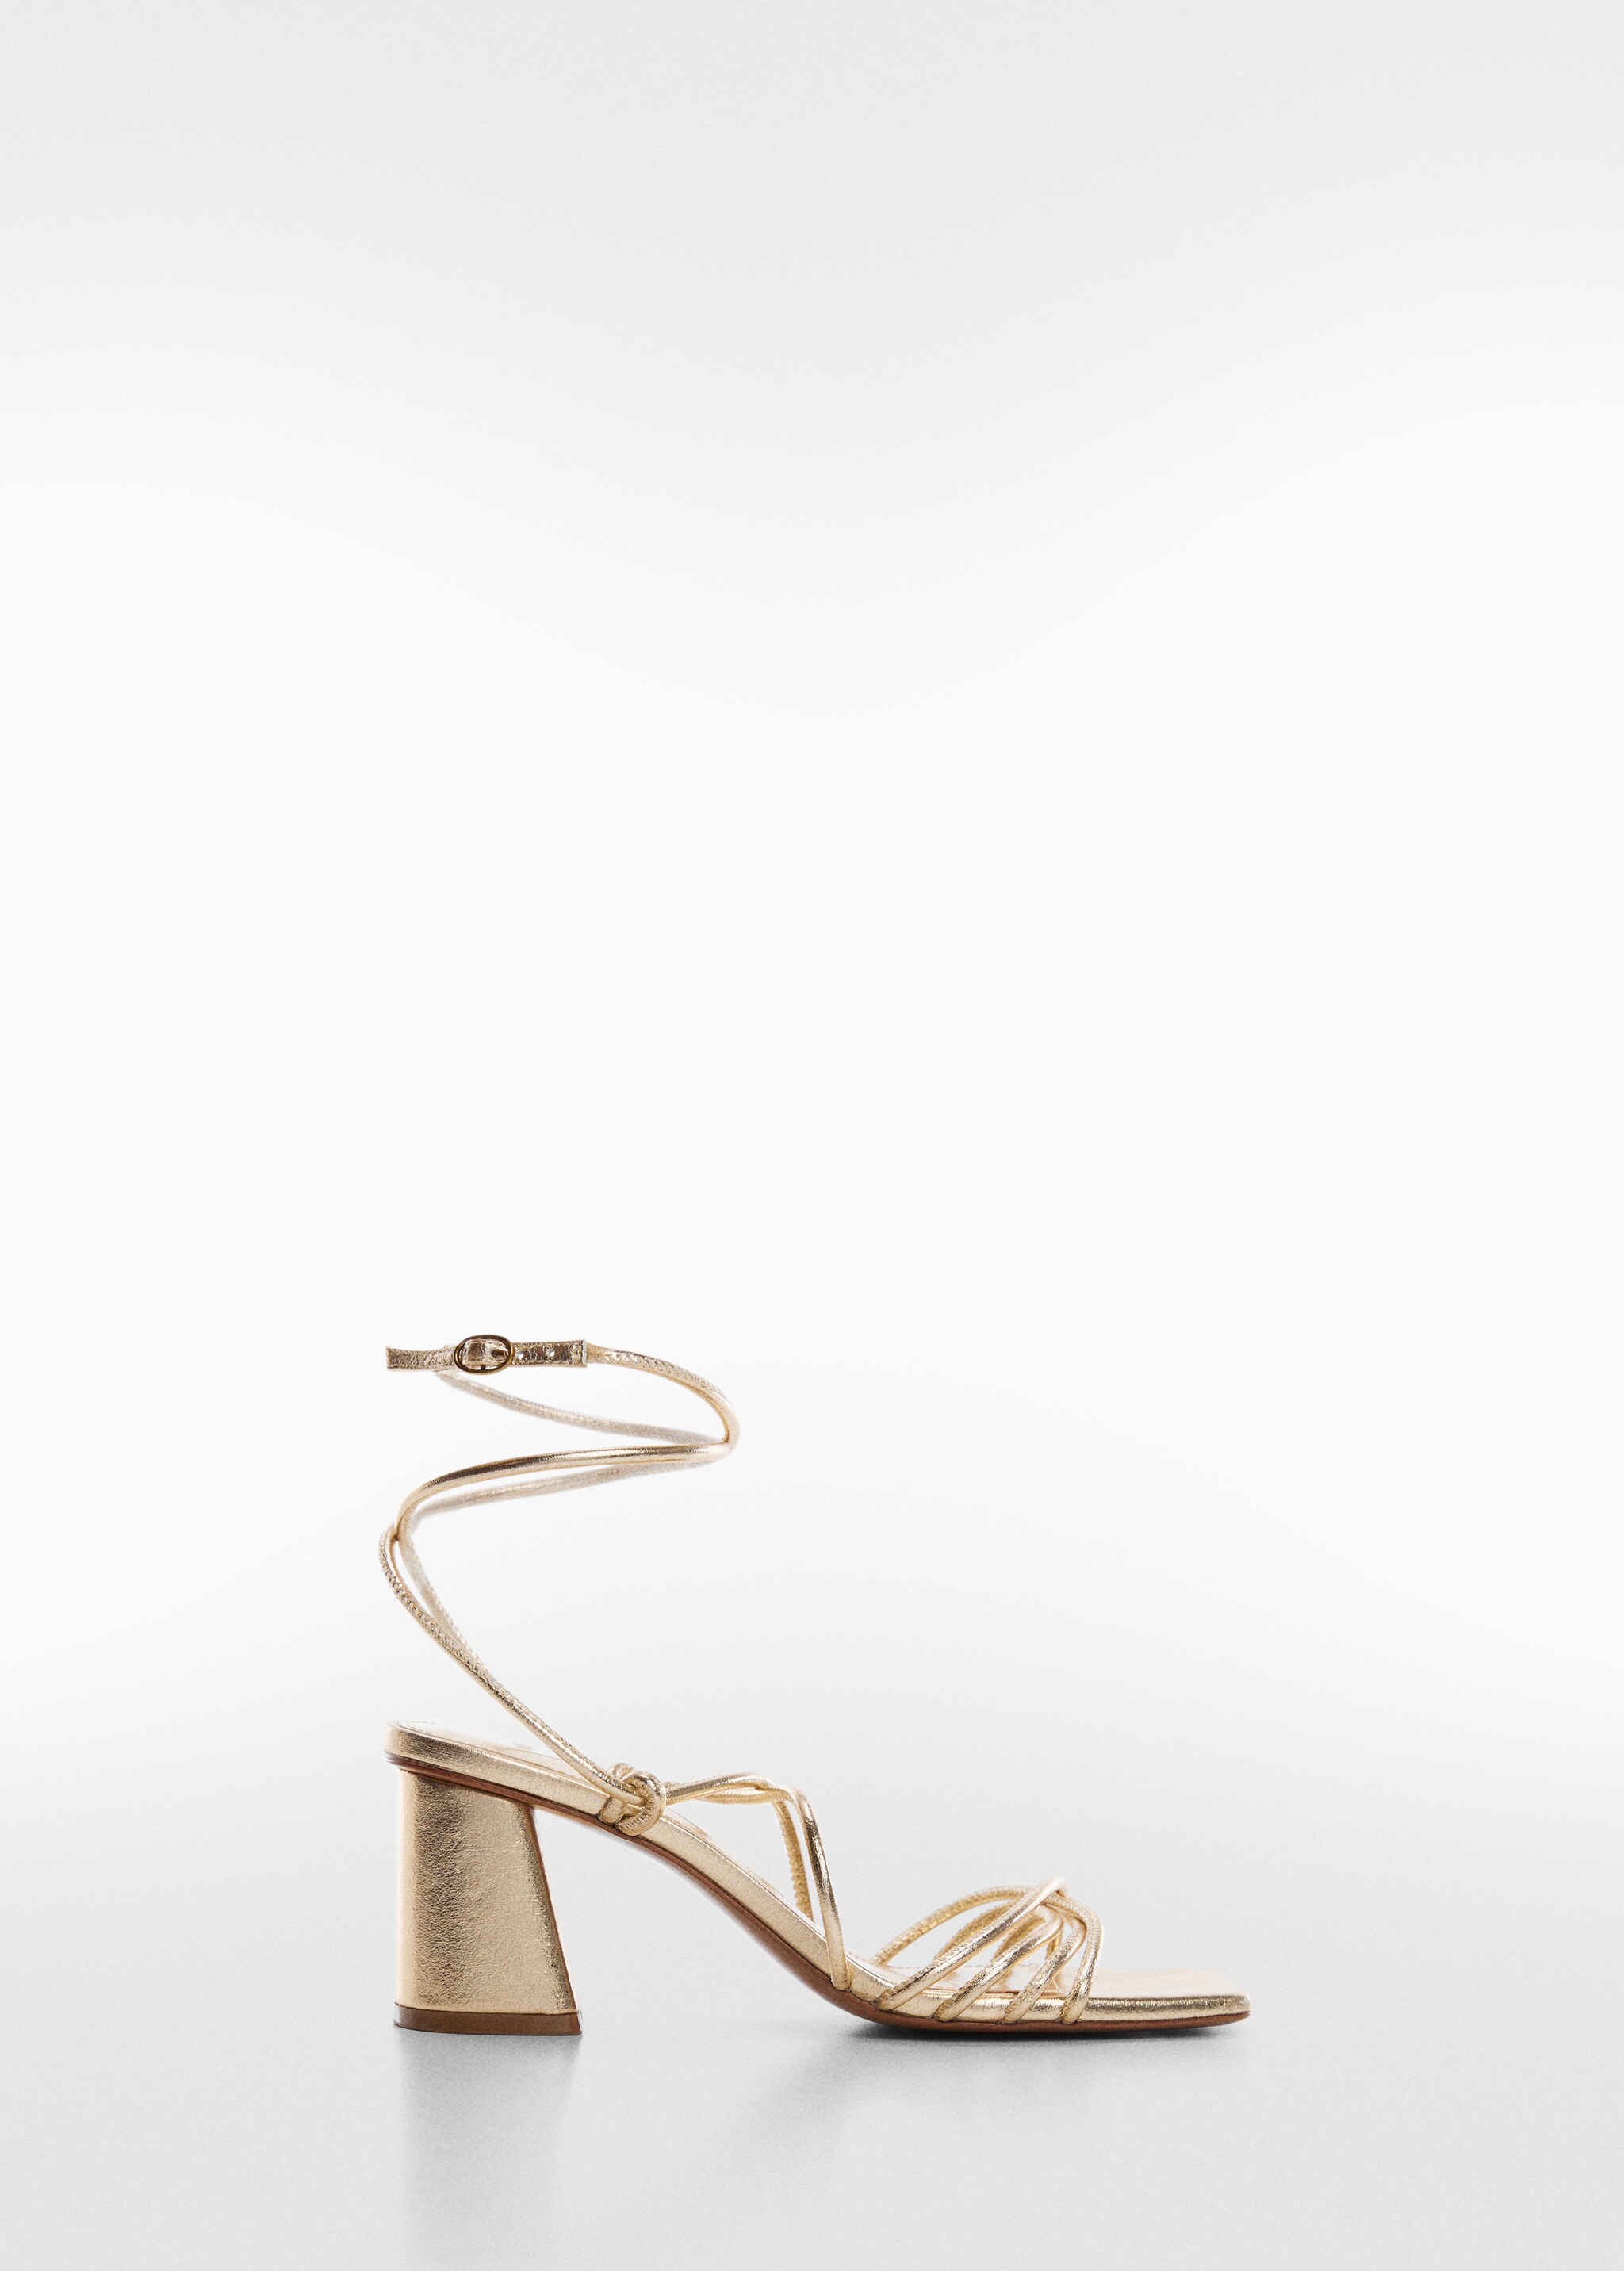 Criss-cross straps sandals - Article without model